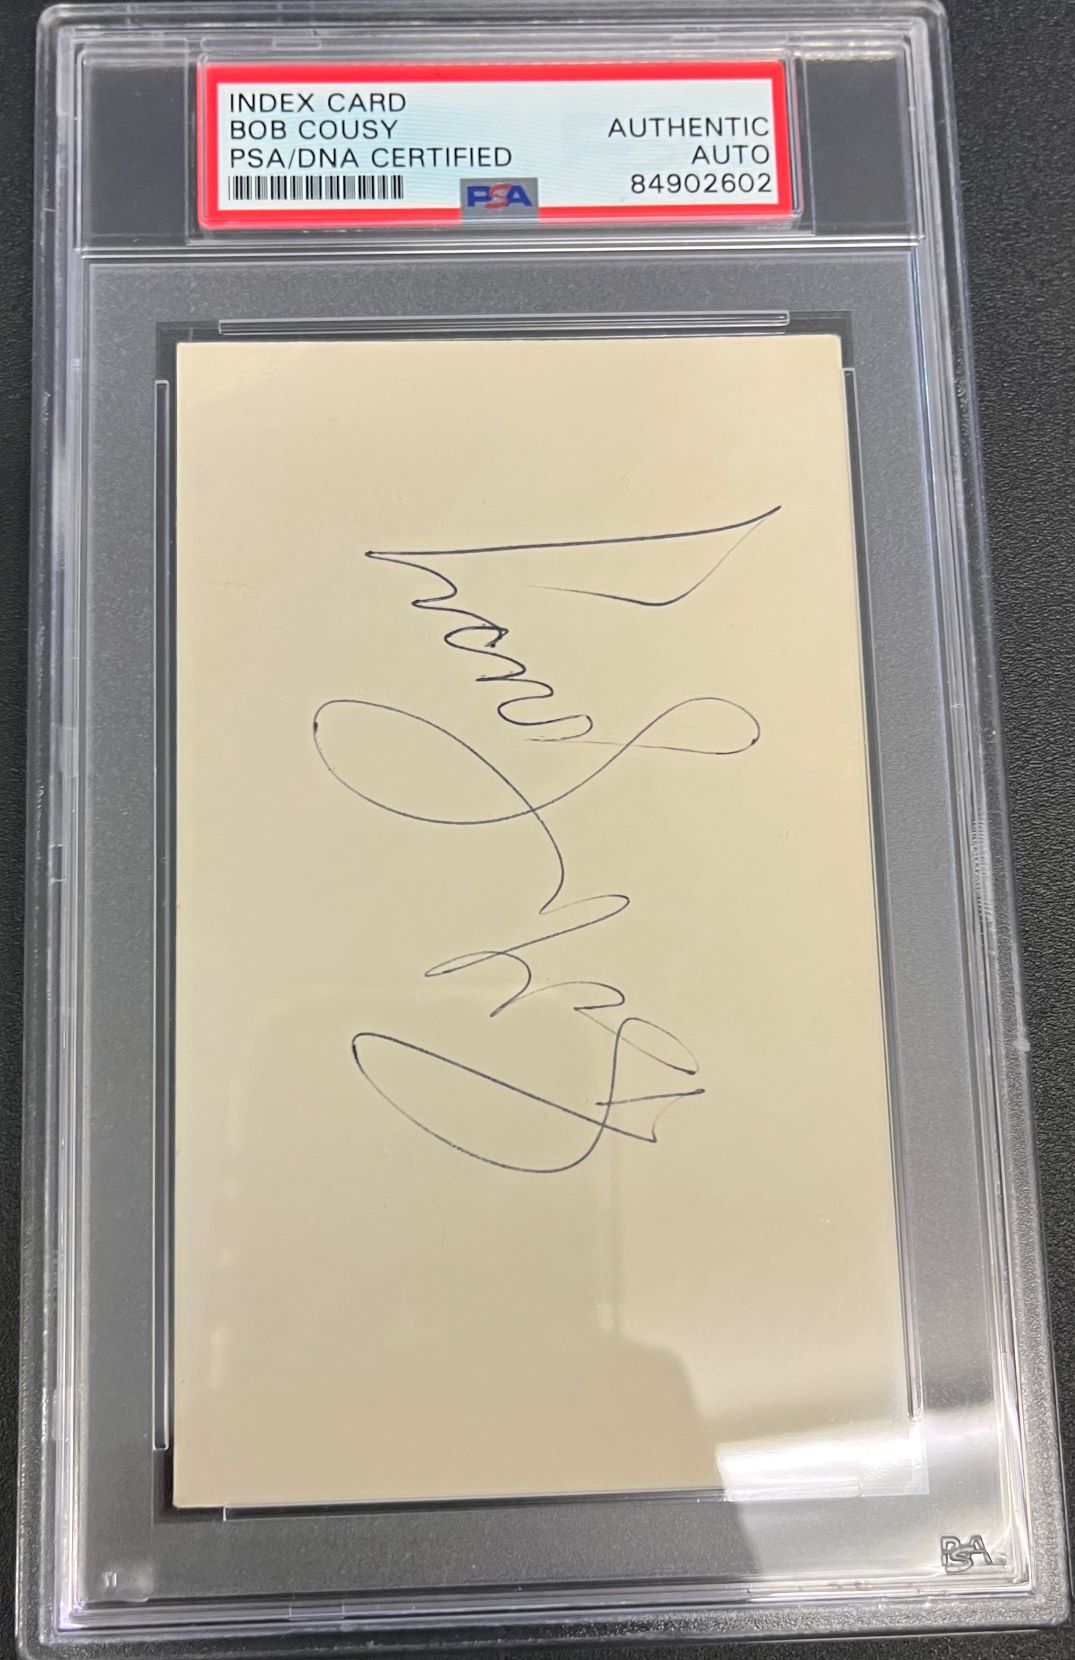 Bob Cousy Signed Index Card PSA Auto